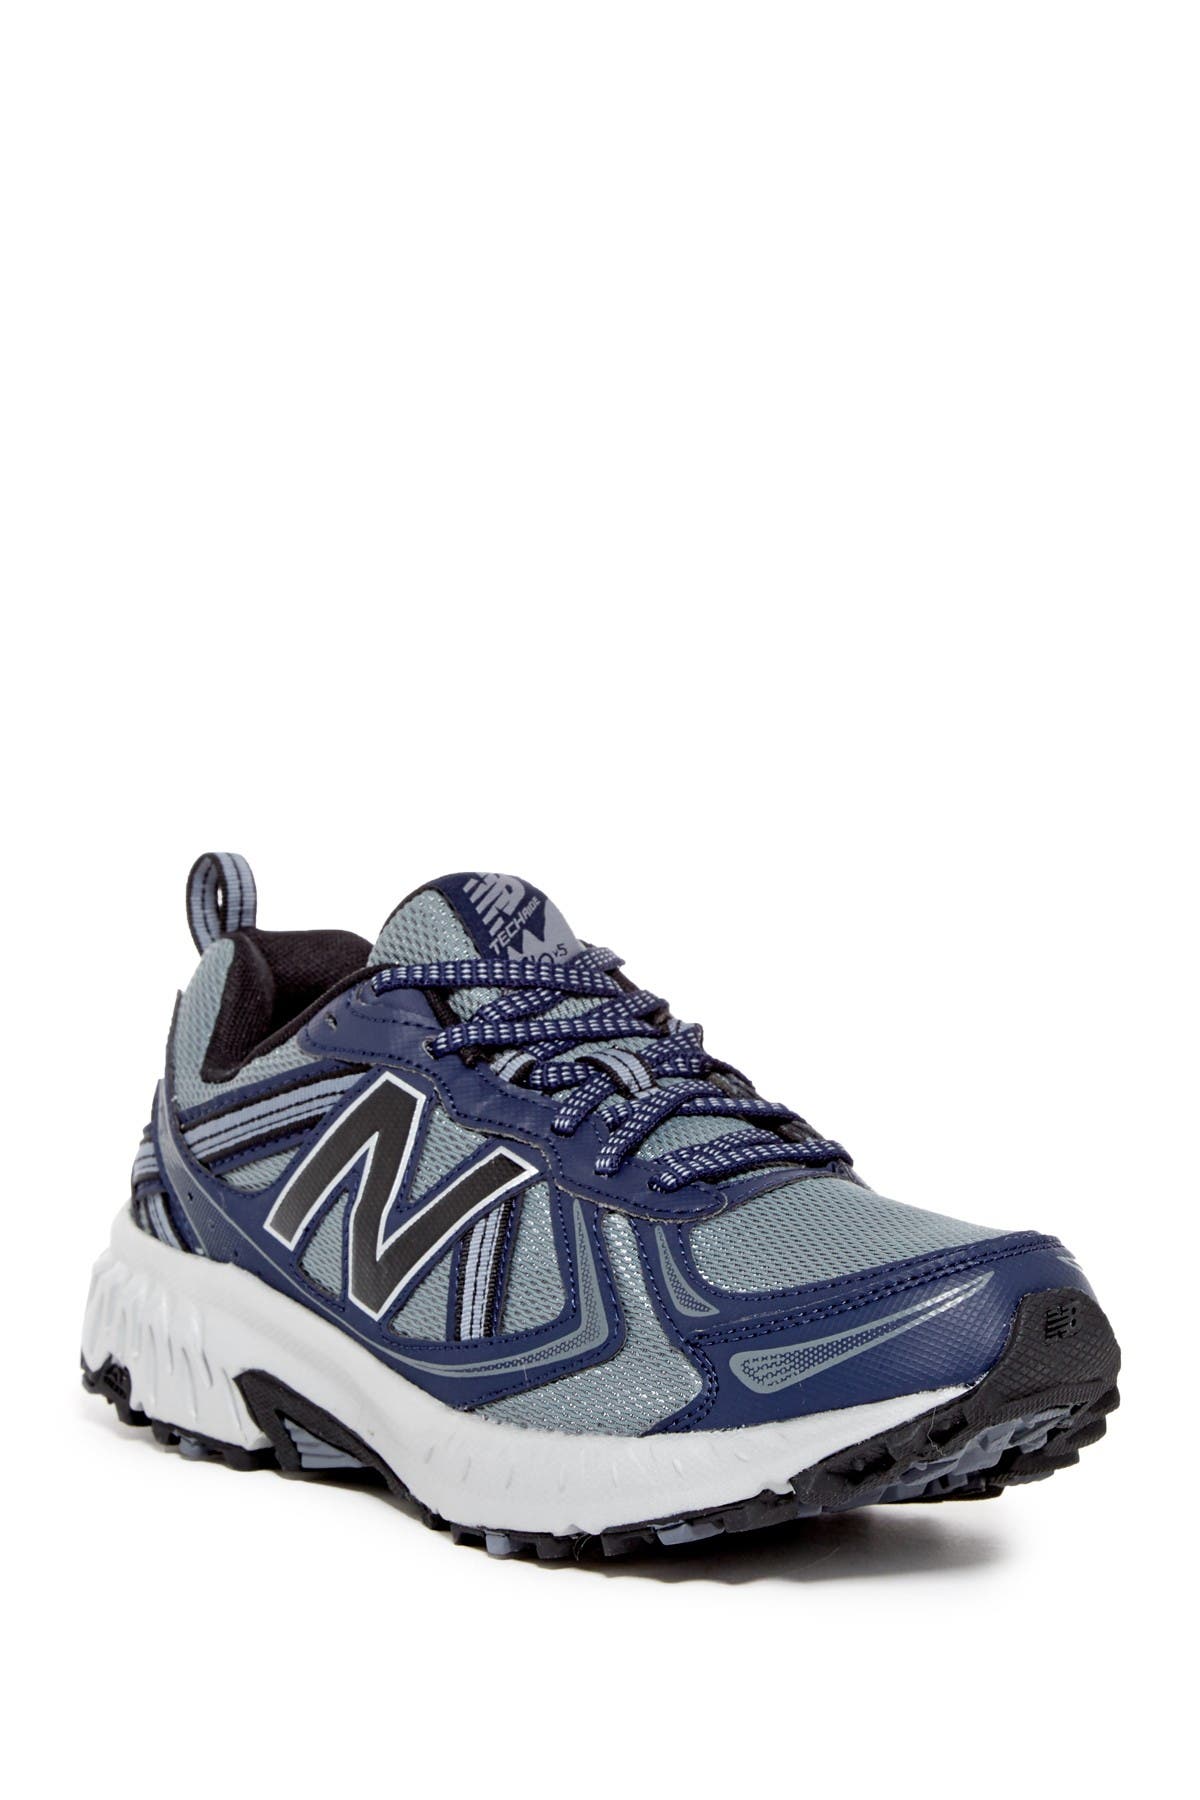 wide width trail running shoes